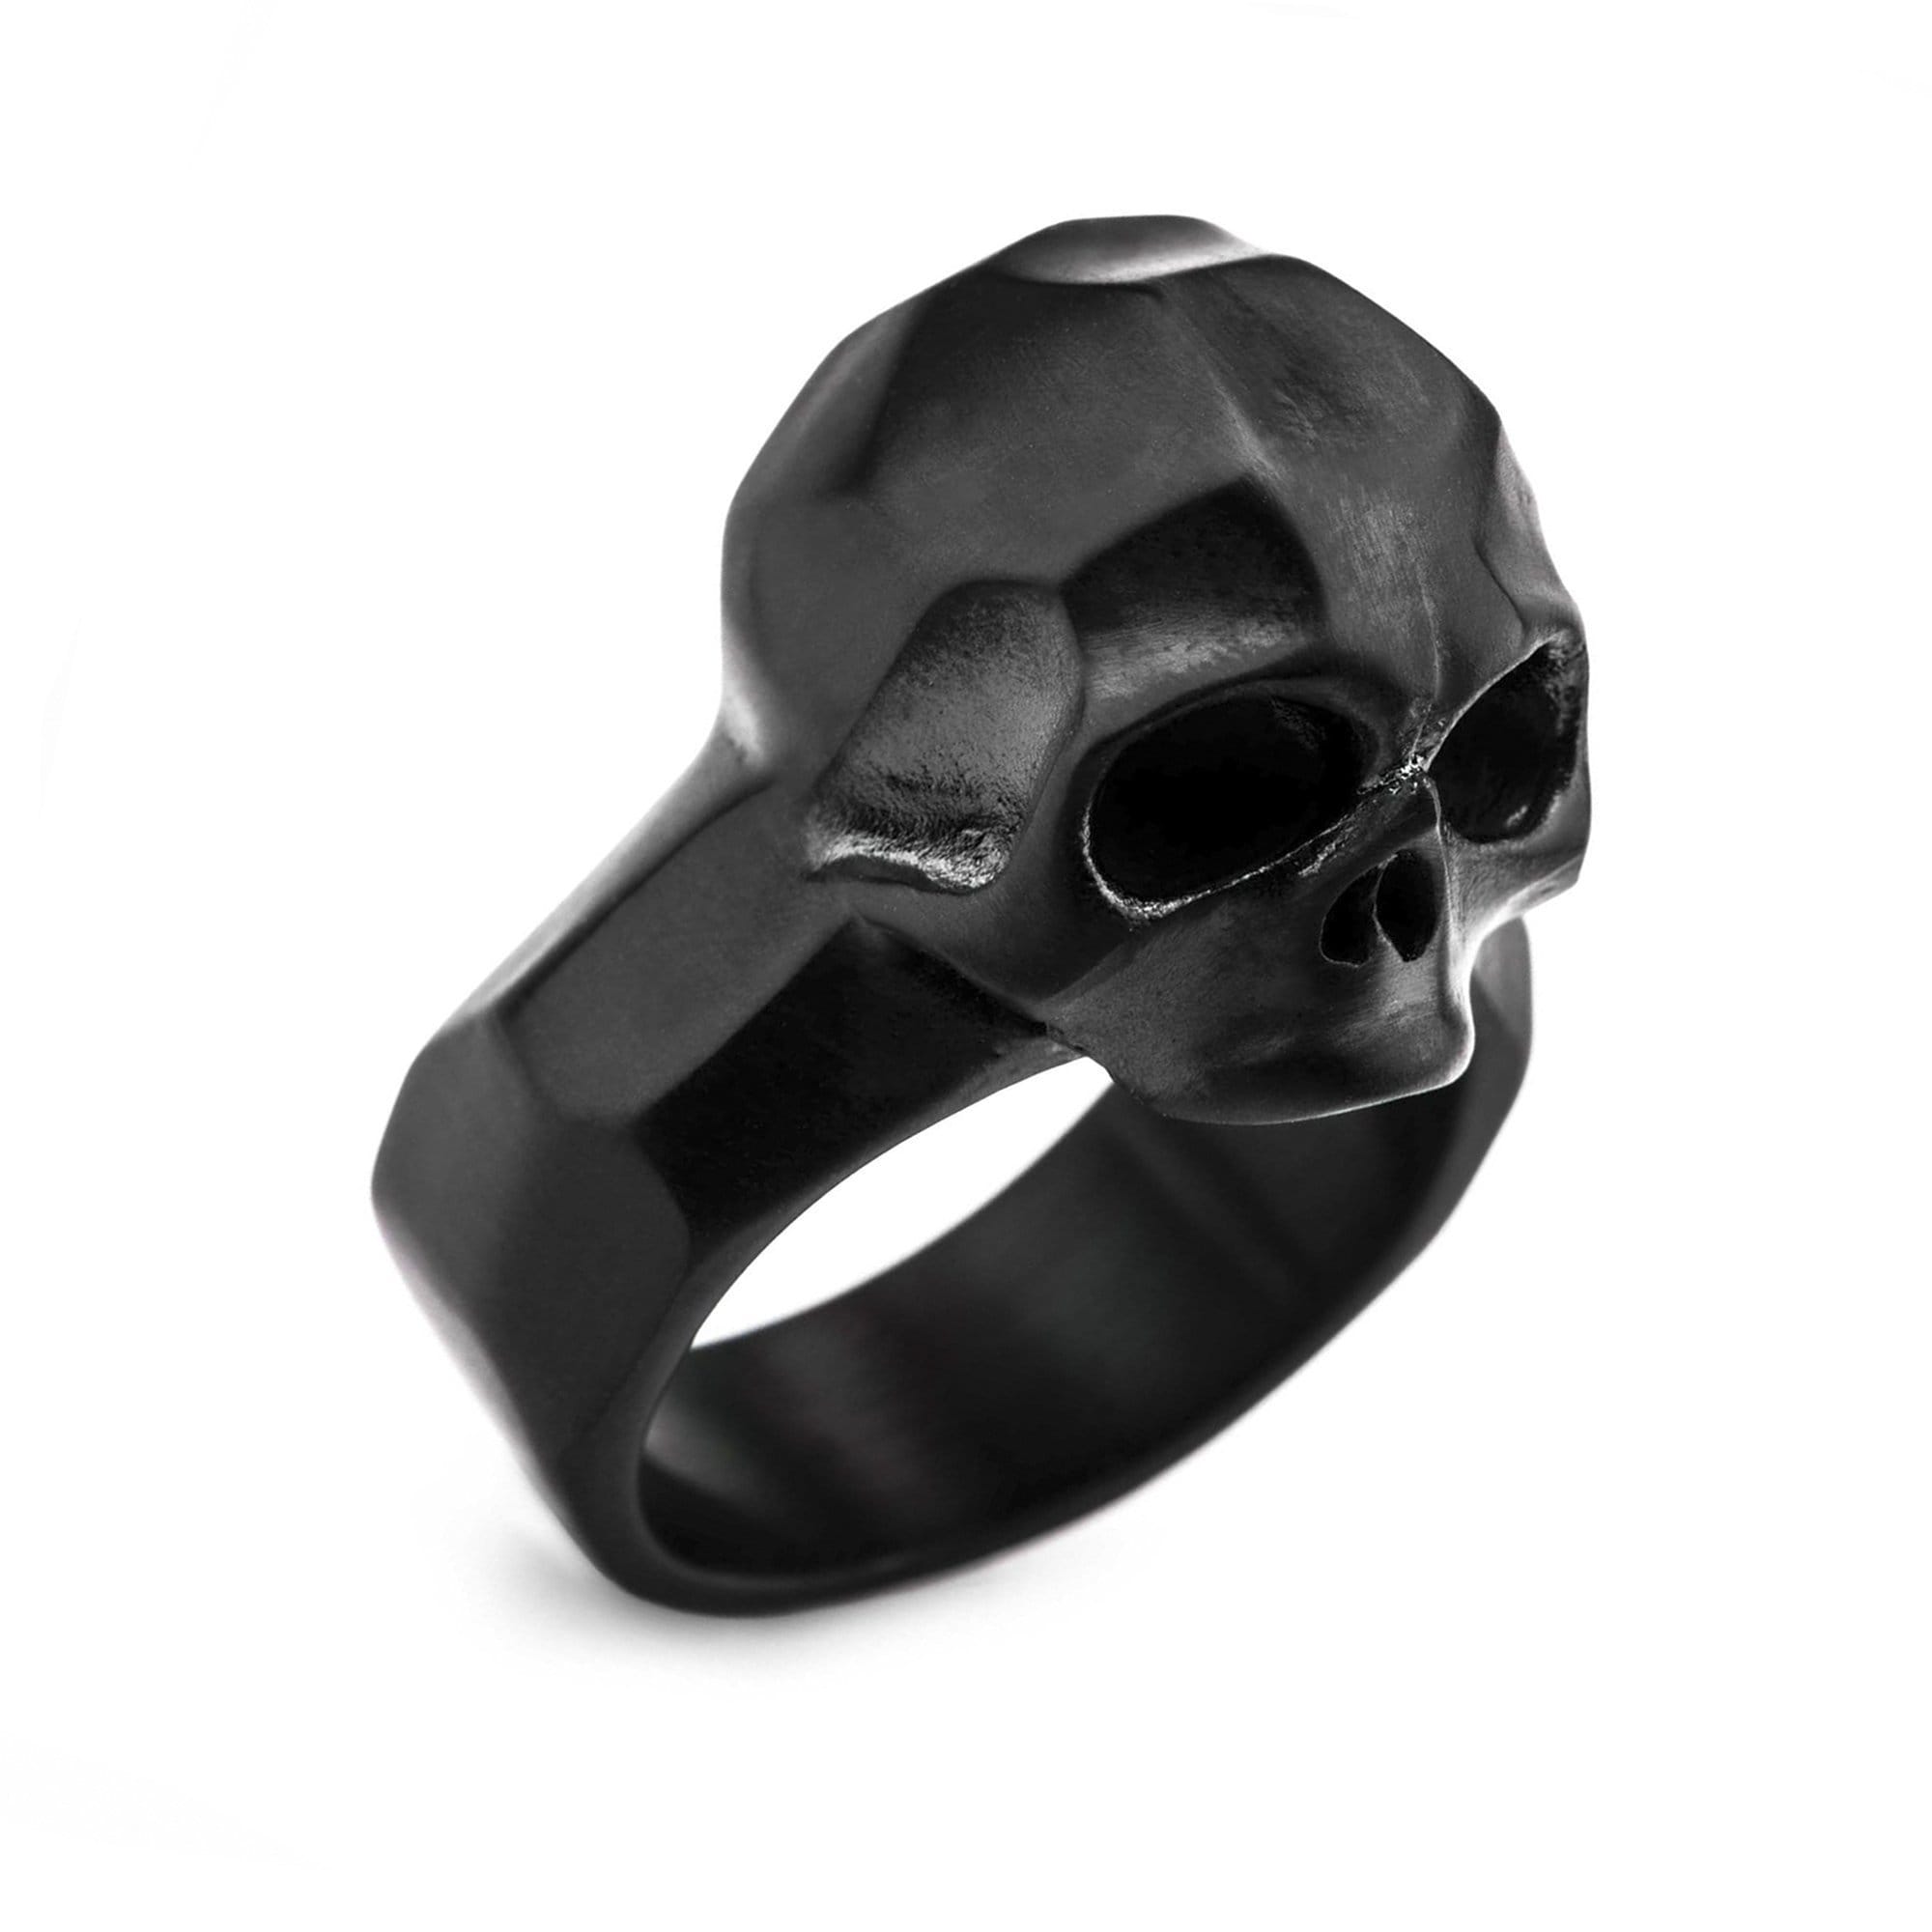 INOX JEWELRY Rings Black Stainless Steel Brushed Finish Rugged Skull Ring